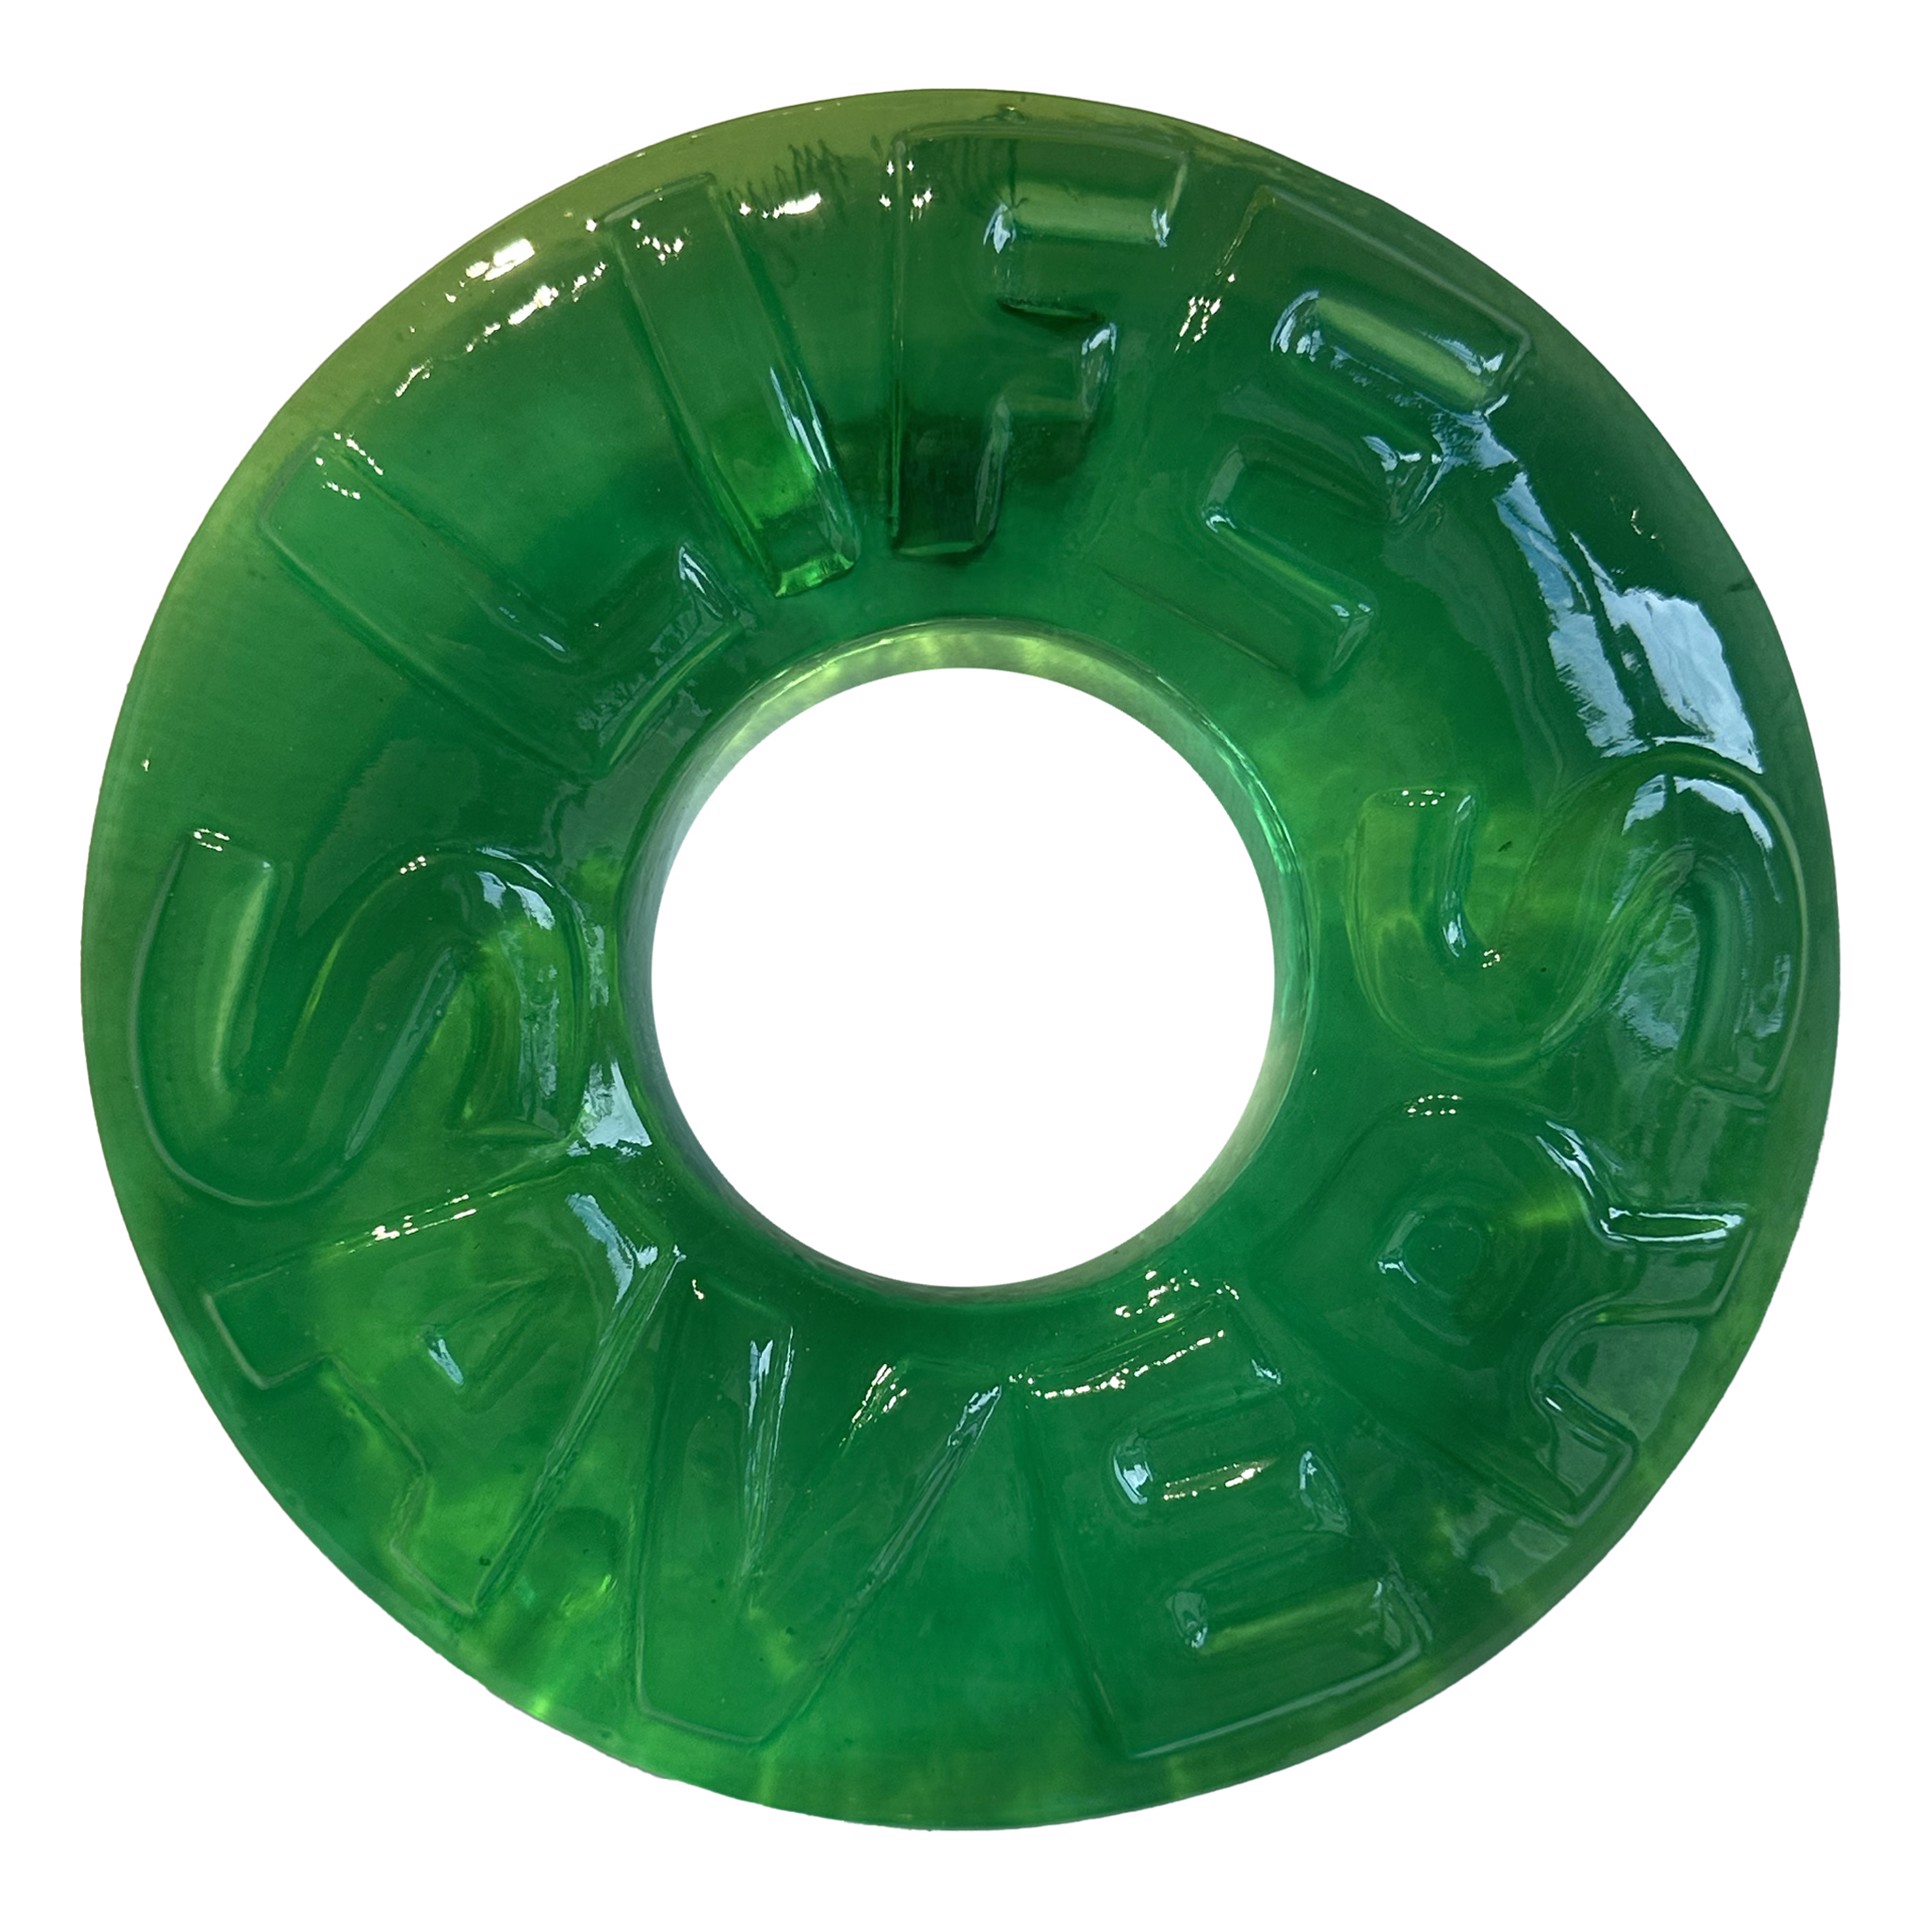 A wall sculpture of a green Life Saver candy by Daniel Meyer